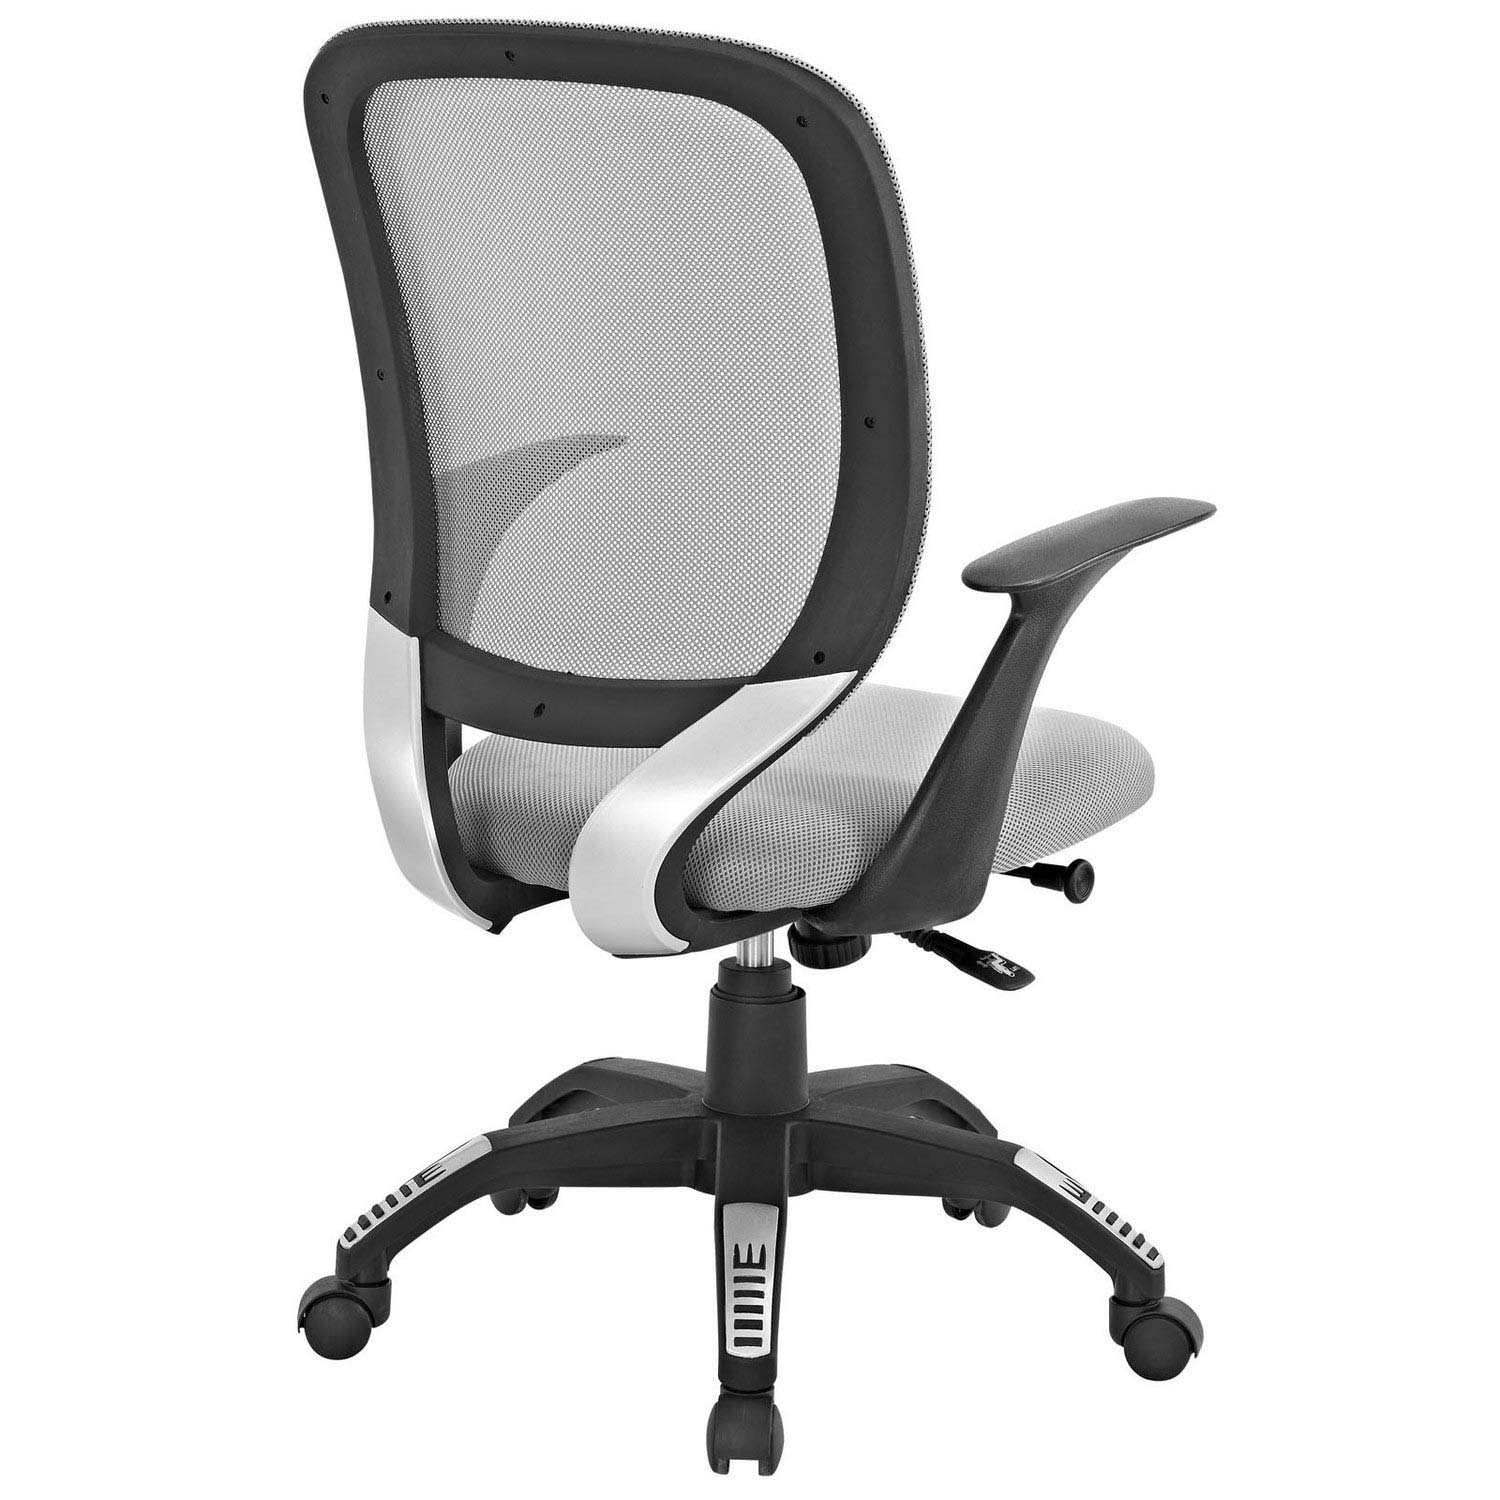 Modway Scope Office Chair - Gray